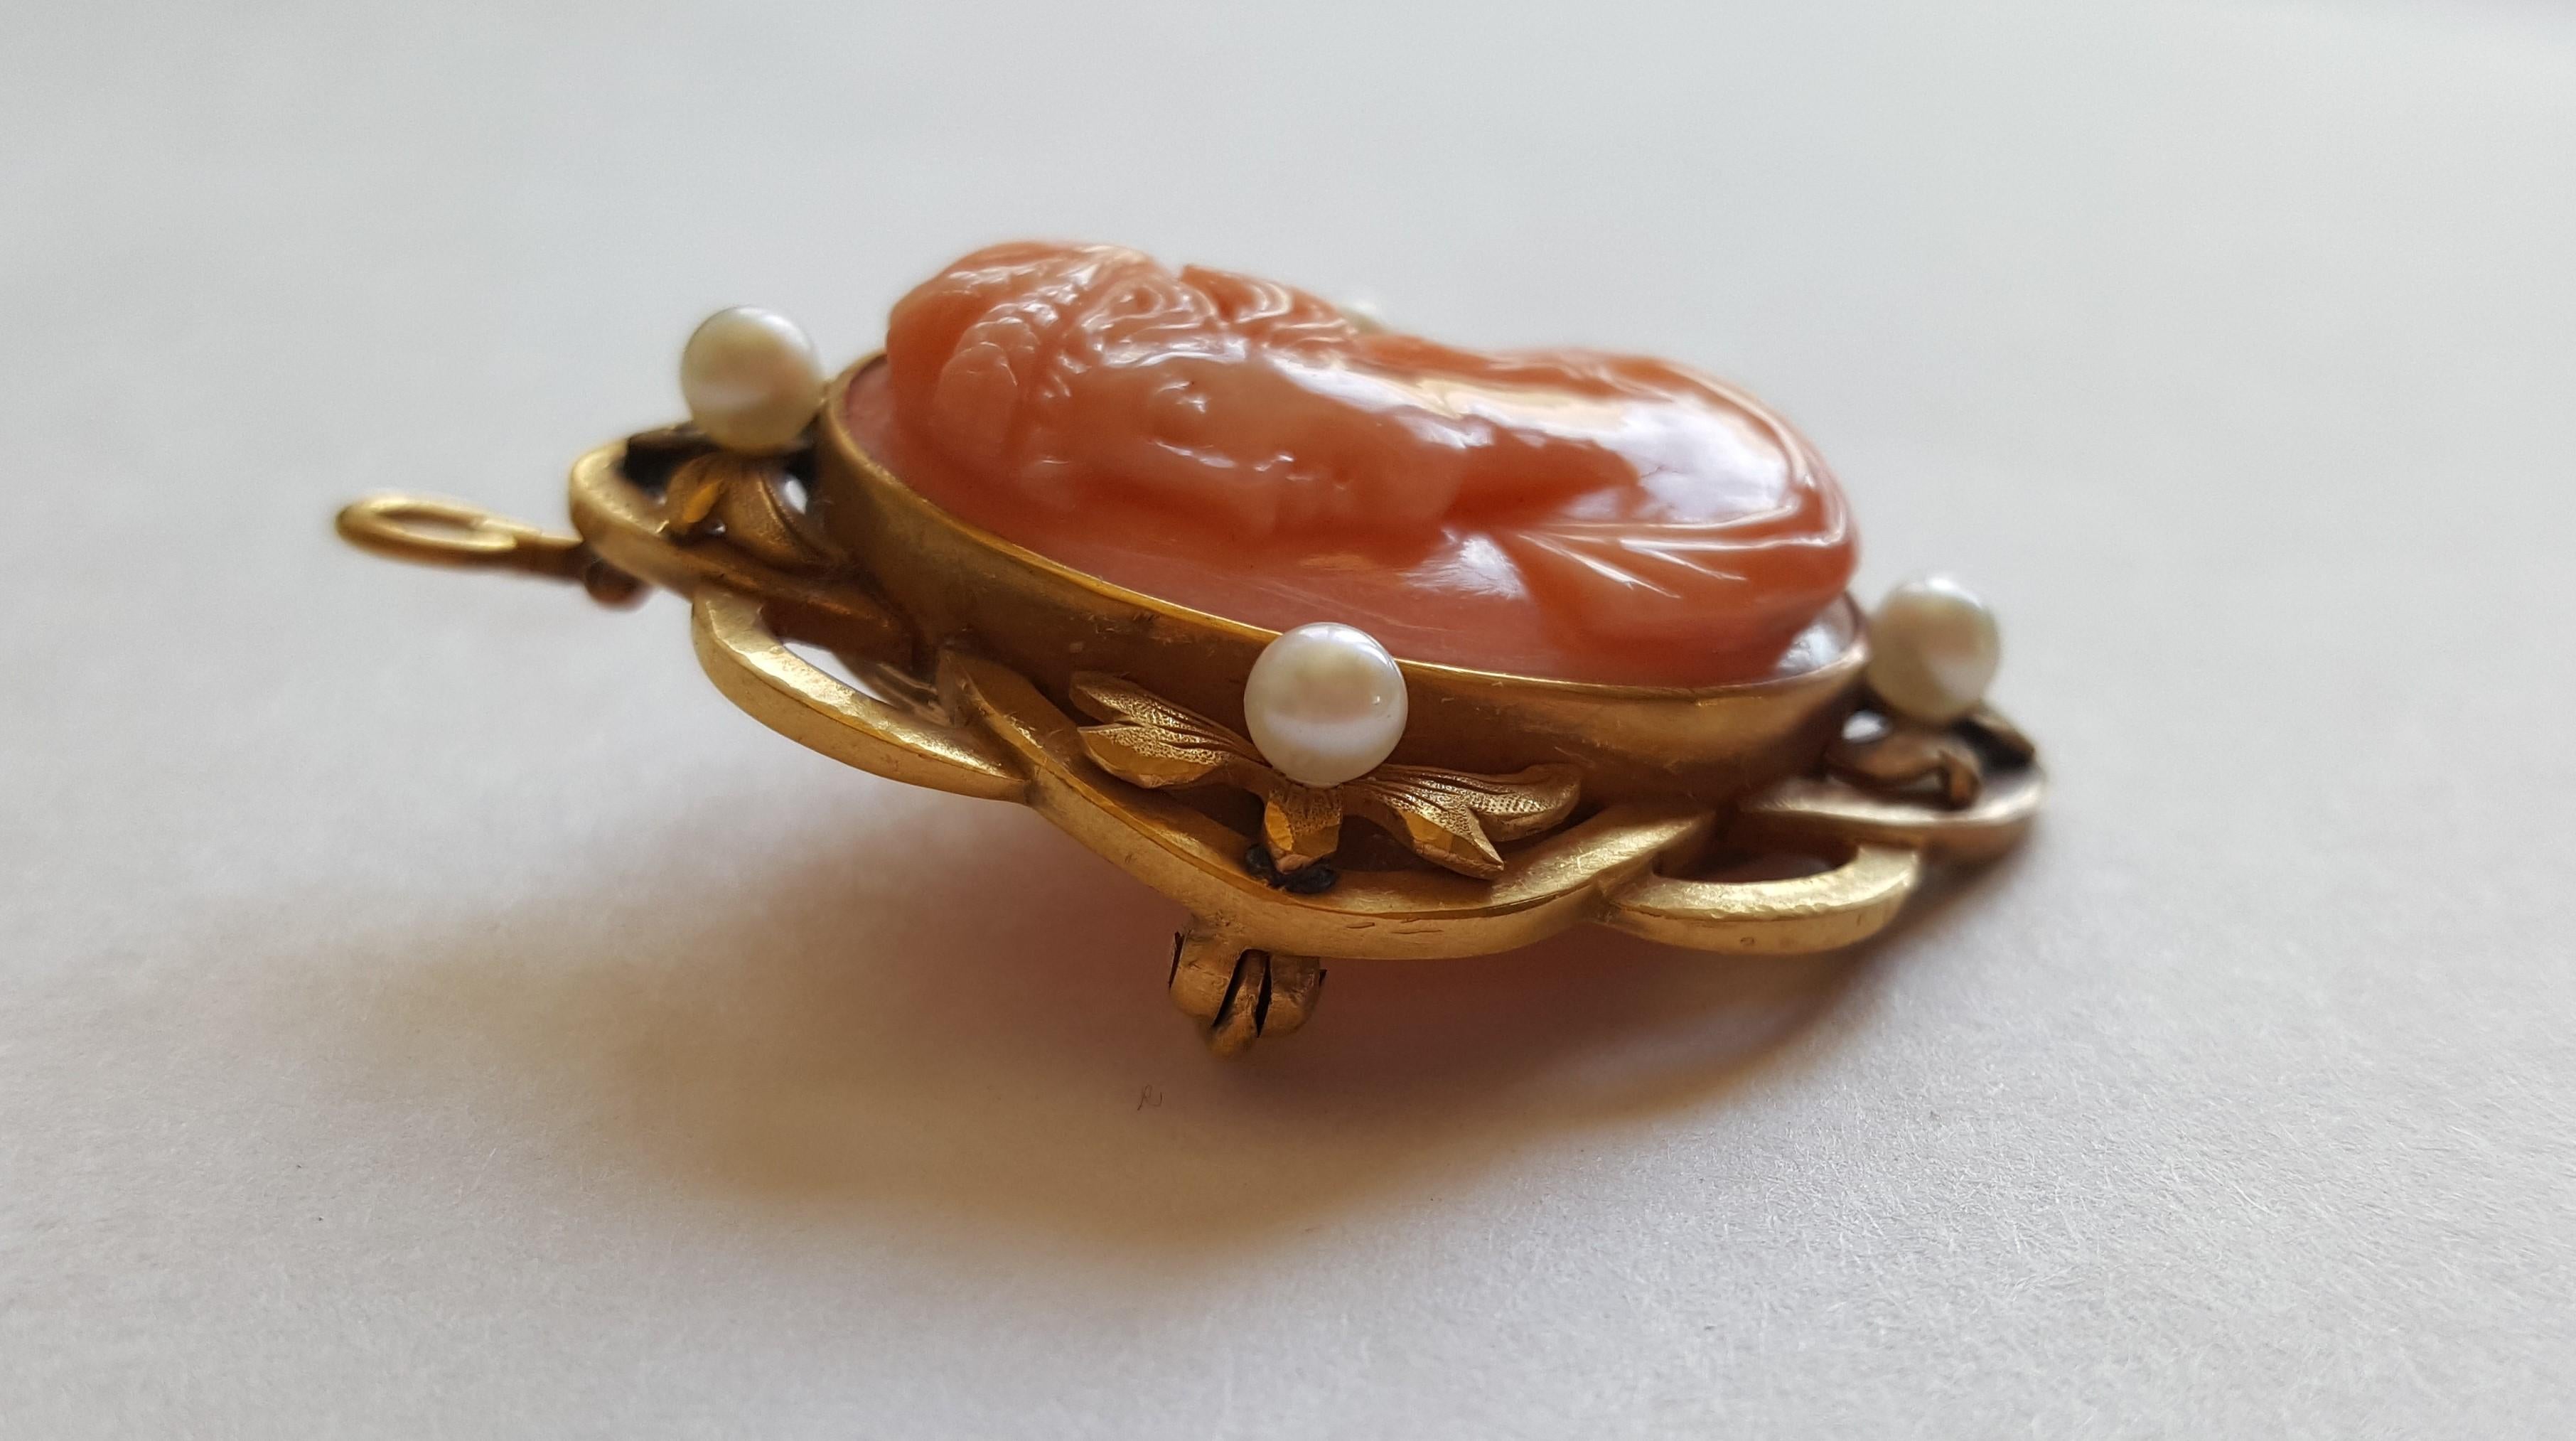 Vintage 14kt Yellow Solid Gold Cameo Pin/Pendant, 3.5mm Small White Natural Pearls, 37mm X 31mm Diameter, 12.7 Grams, Heavy.

The pin is not marked, however, we're professional jewelers and we've tested the gold and it's 14k yellow gold solid. This